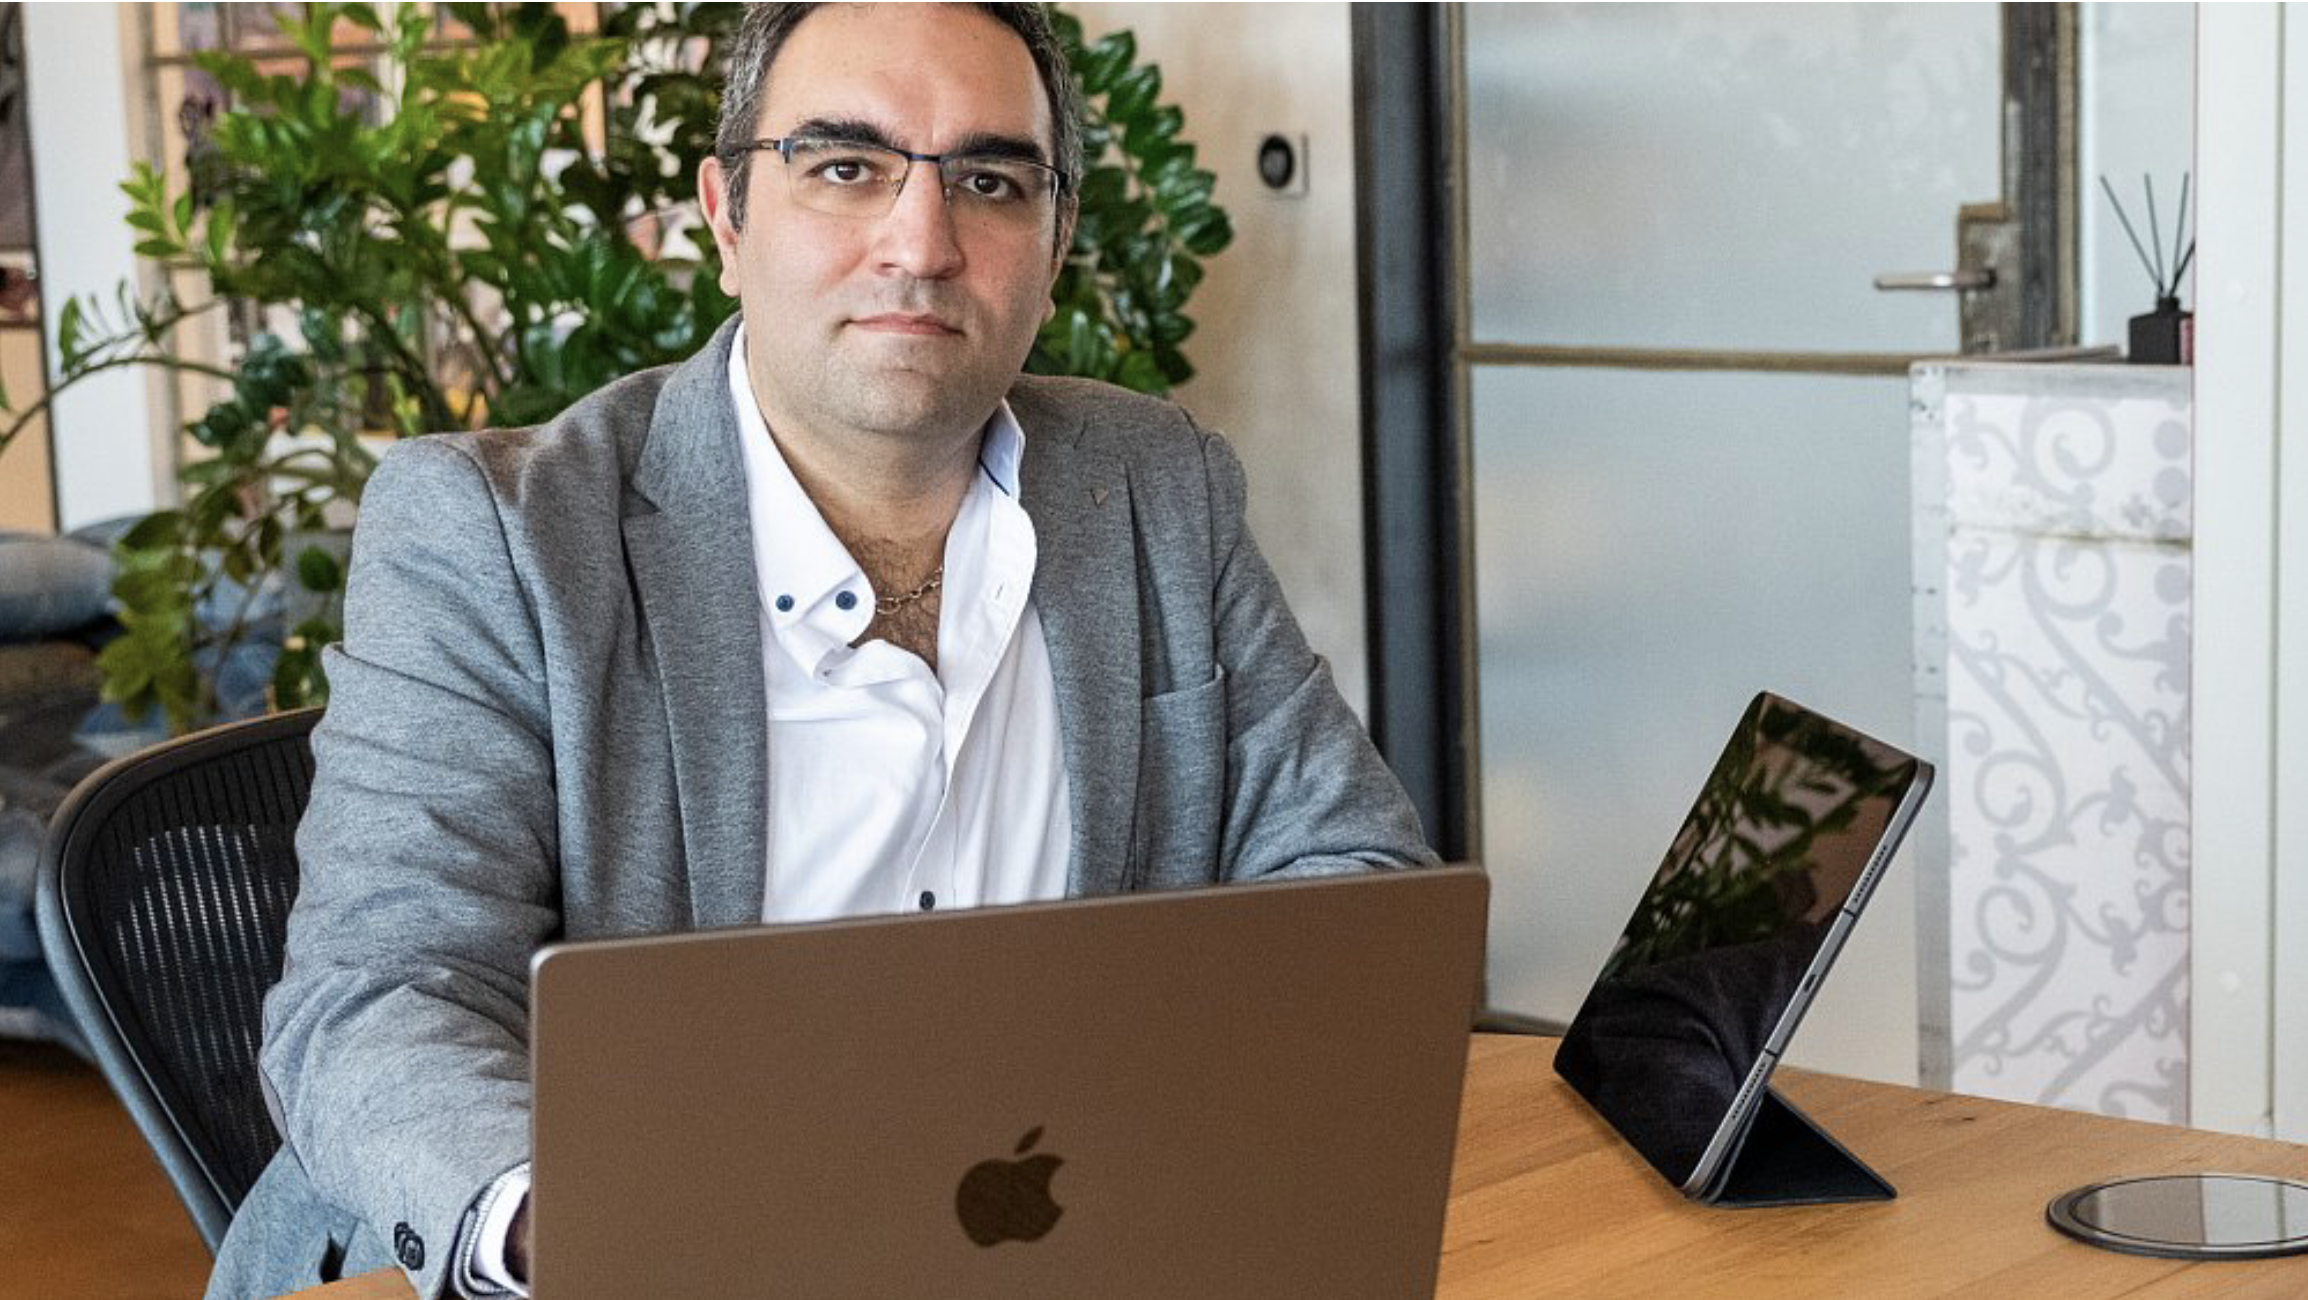 Iranian-born Leads Company with International Staff from Herford Germany